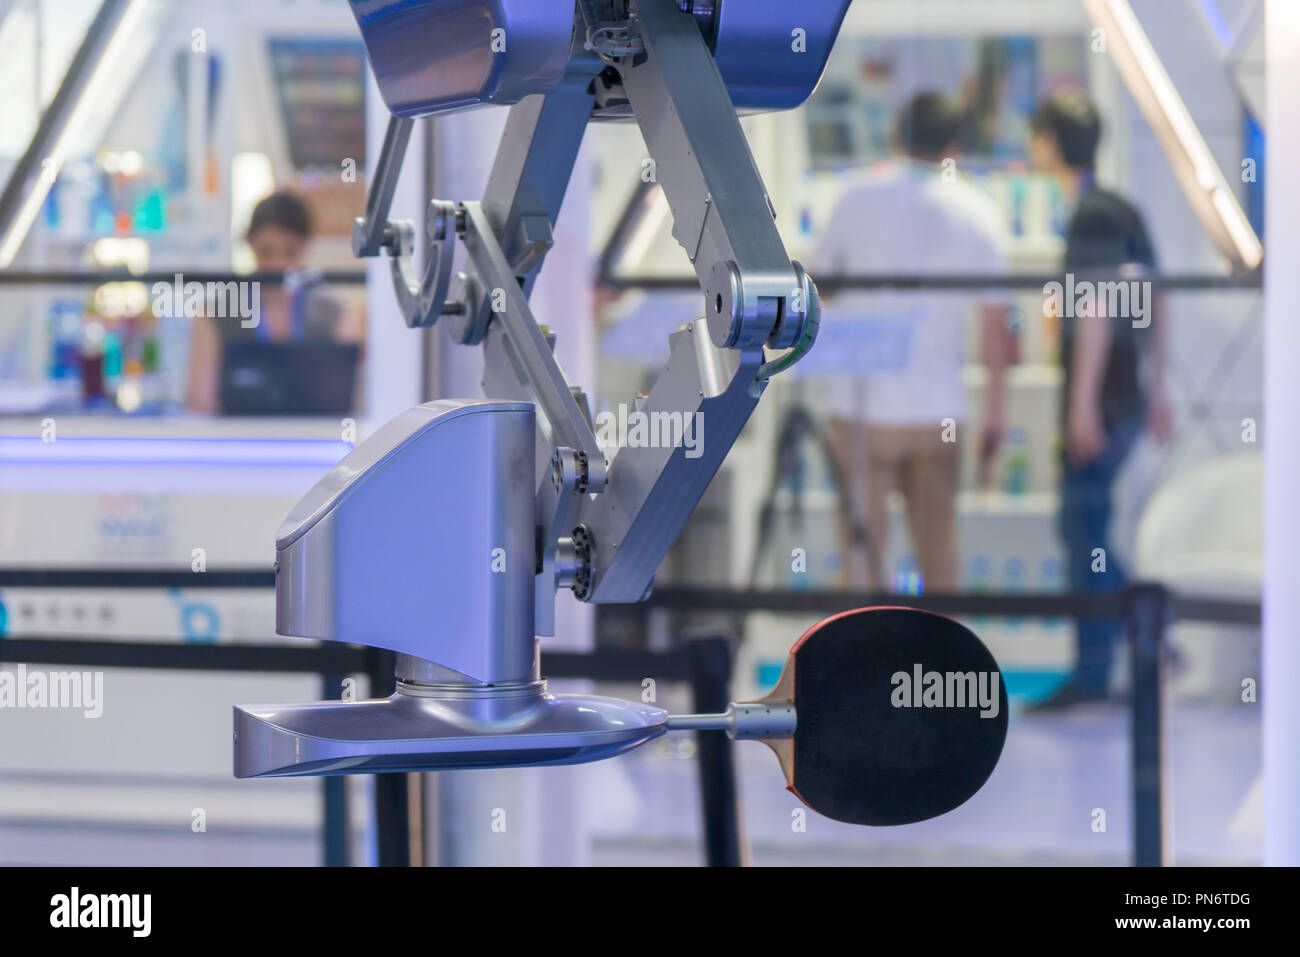 Shanghai, Shanghai, China. 20th Sep, 2018. Shanghai, CHINA-The robot Ã¢â‚¬ËœPongbotÃ¢â‚¬â„¢ plays pingpong with an athlete at the Artificial Intelligence World Conference in Shanghai, China. Credit: SIPA Asia/ZUMA Wire/Alamy Live News Stock Photo